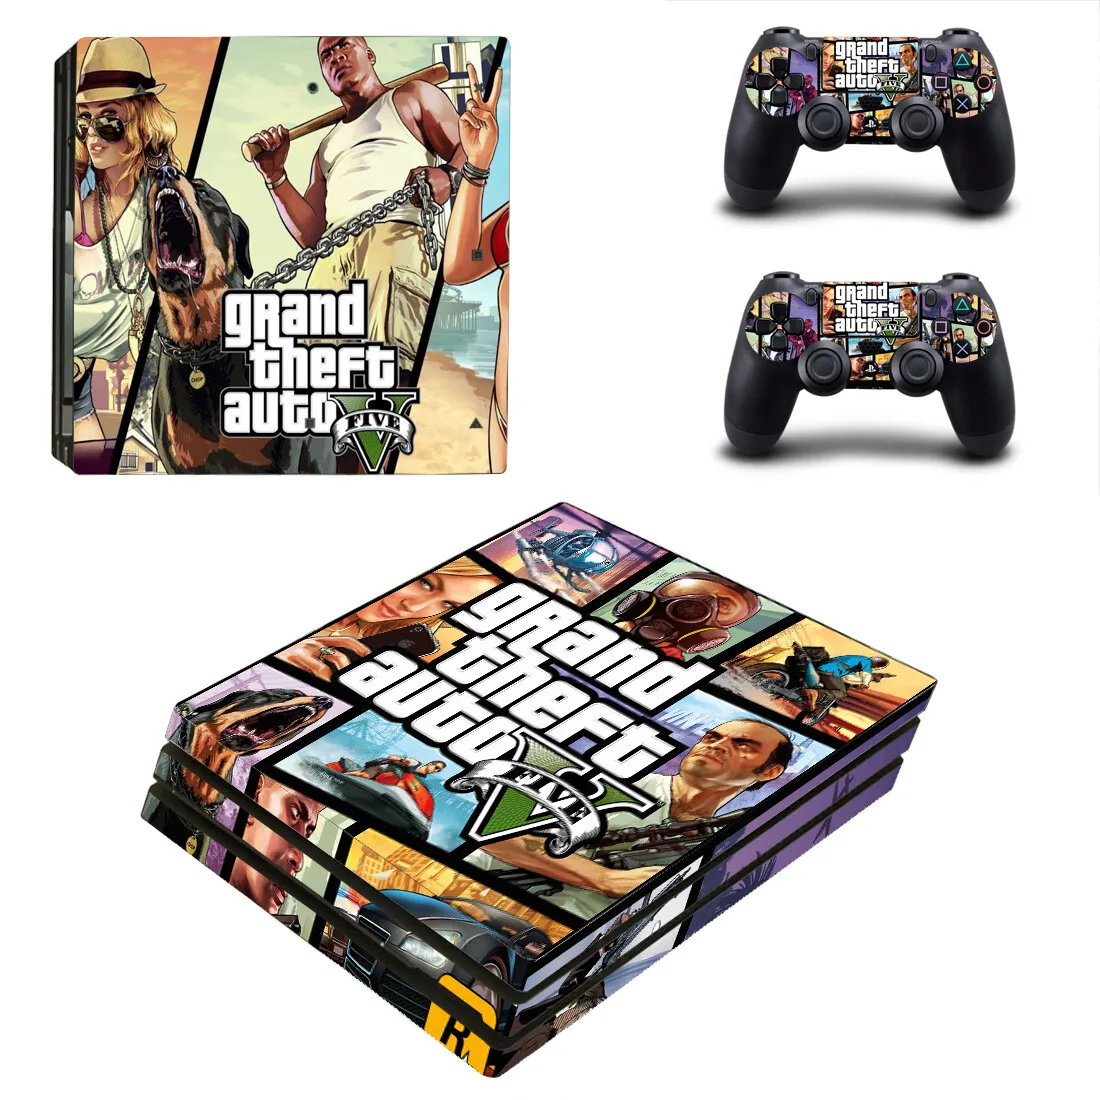 Grand Theft Auto V Gta 5 Ps4 Pro Skin Cover For Playstation 4 Ps4 Pro Console & Controller Skins Vinyl - Stickers - AliExpress